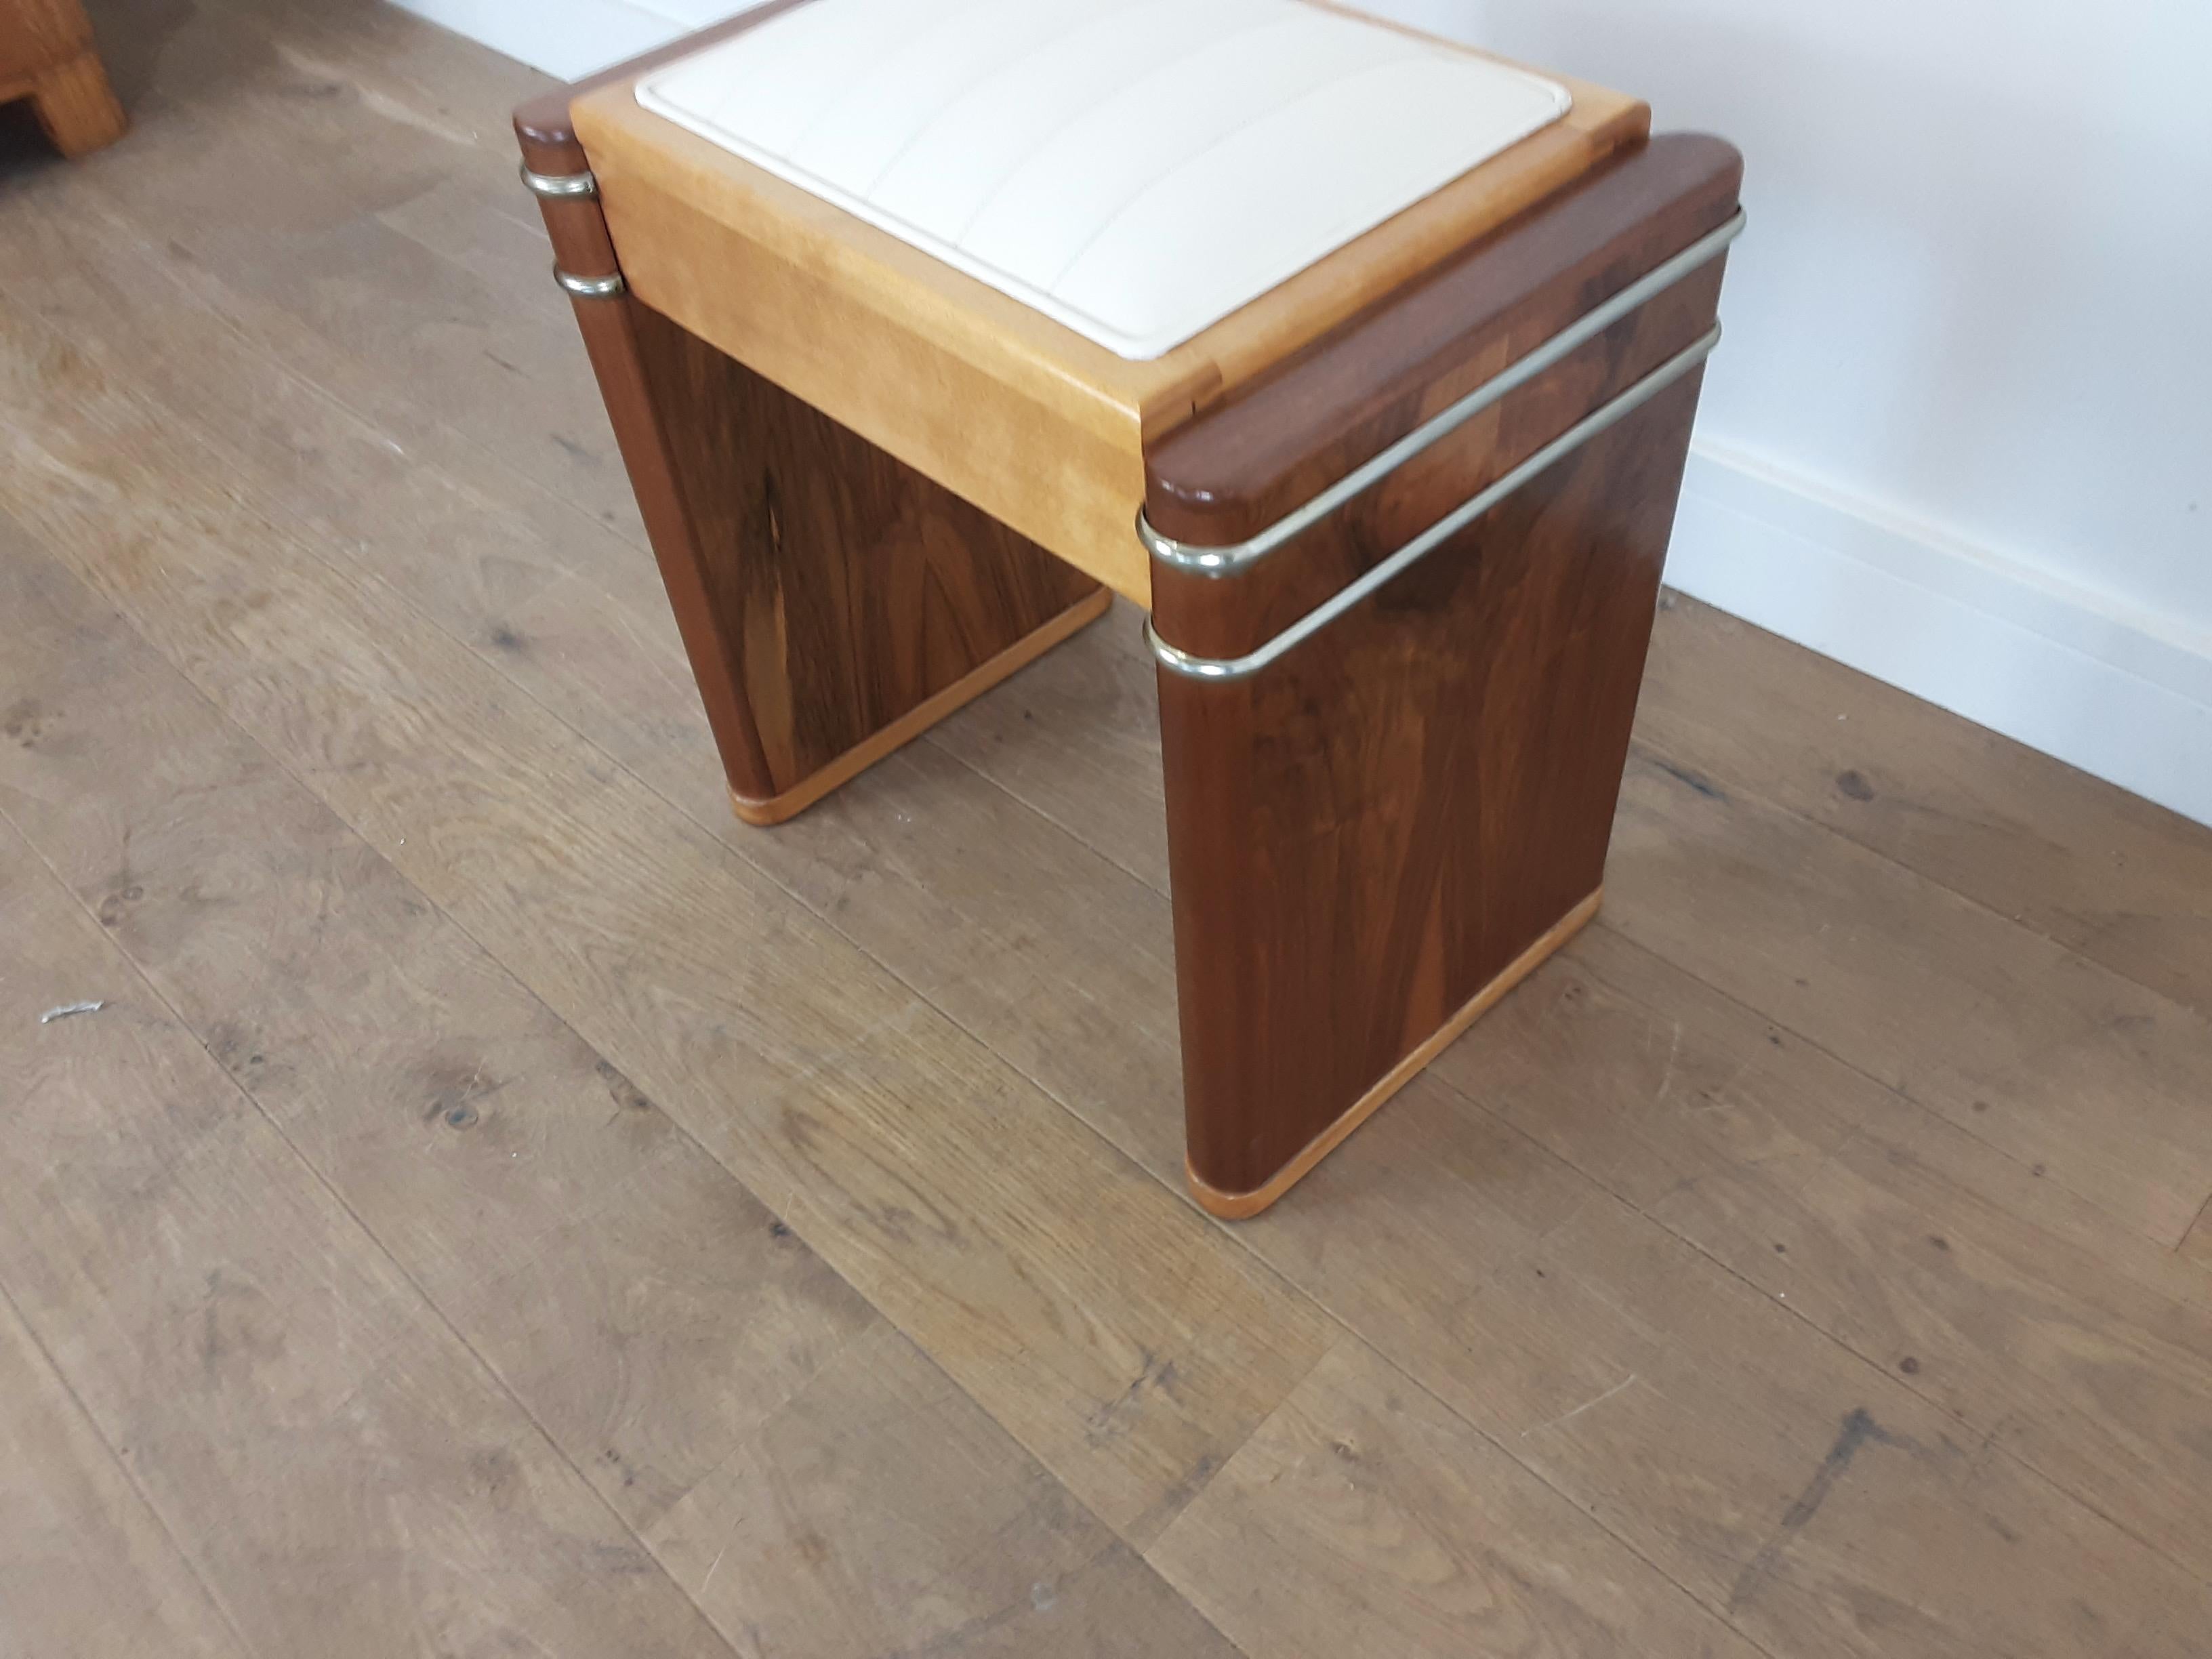 20th Century British Art Deco Piano Stool by Ministools in Satin Birch and Walnut For Sale